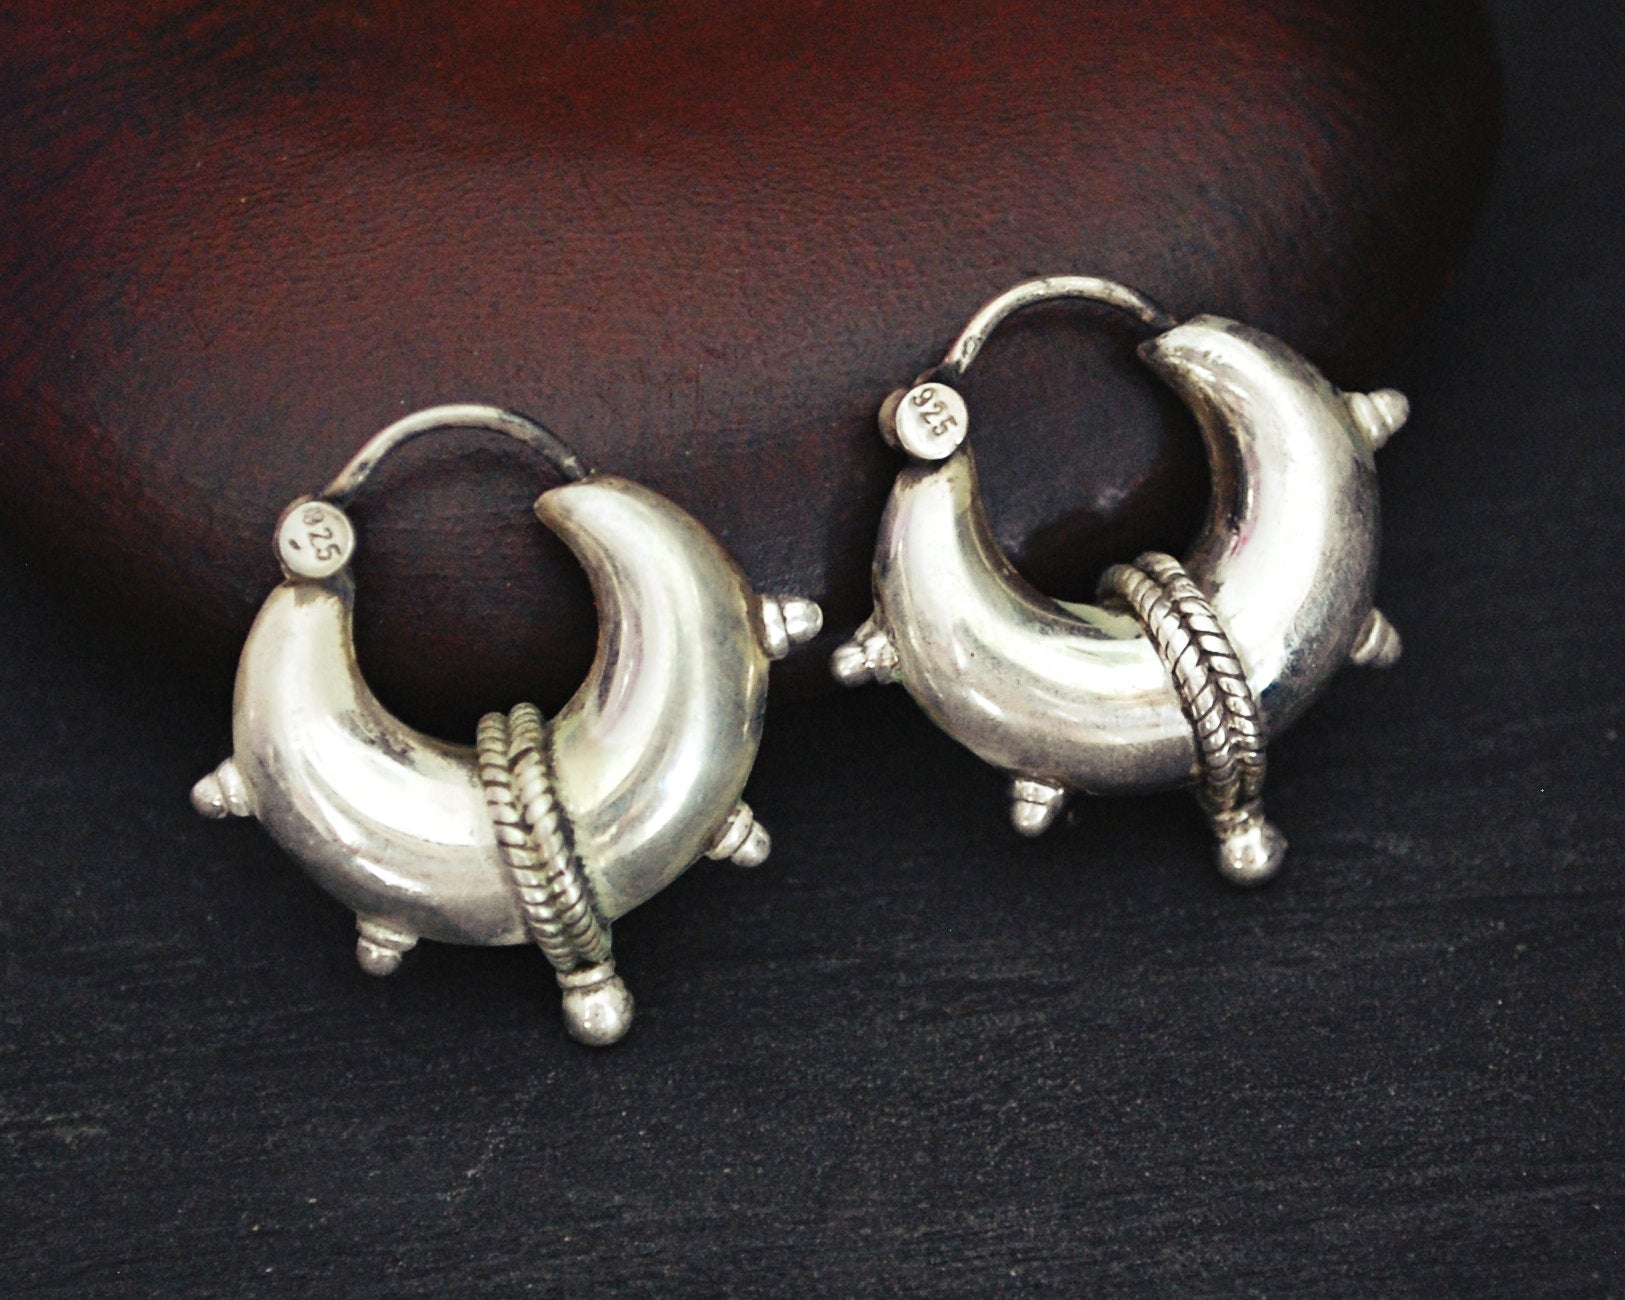 Rajasthani Hoop Earrings with Spikes - SMALL